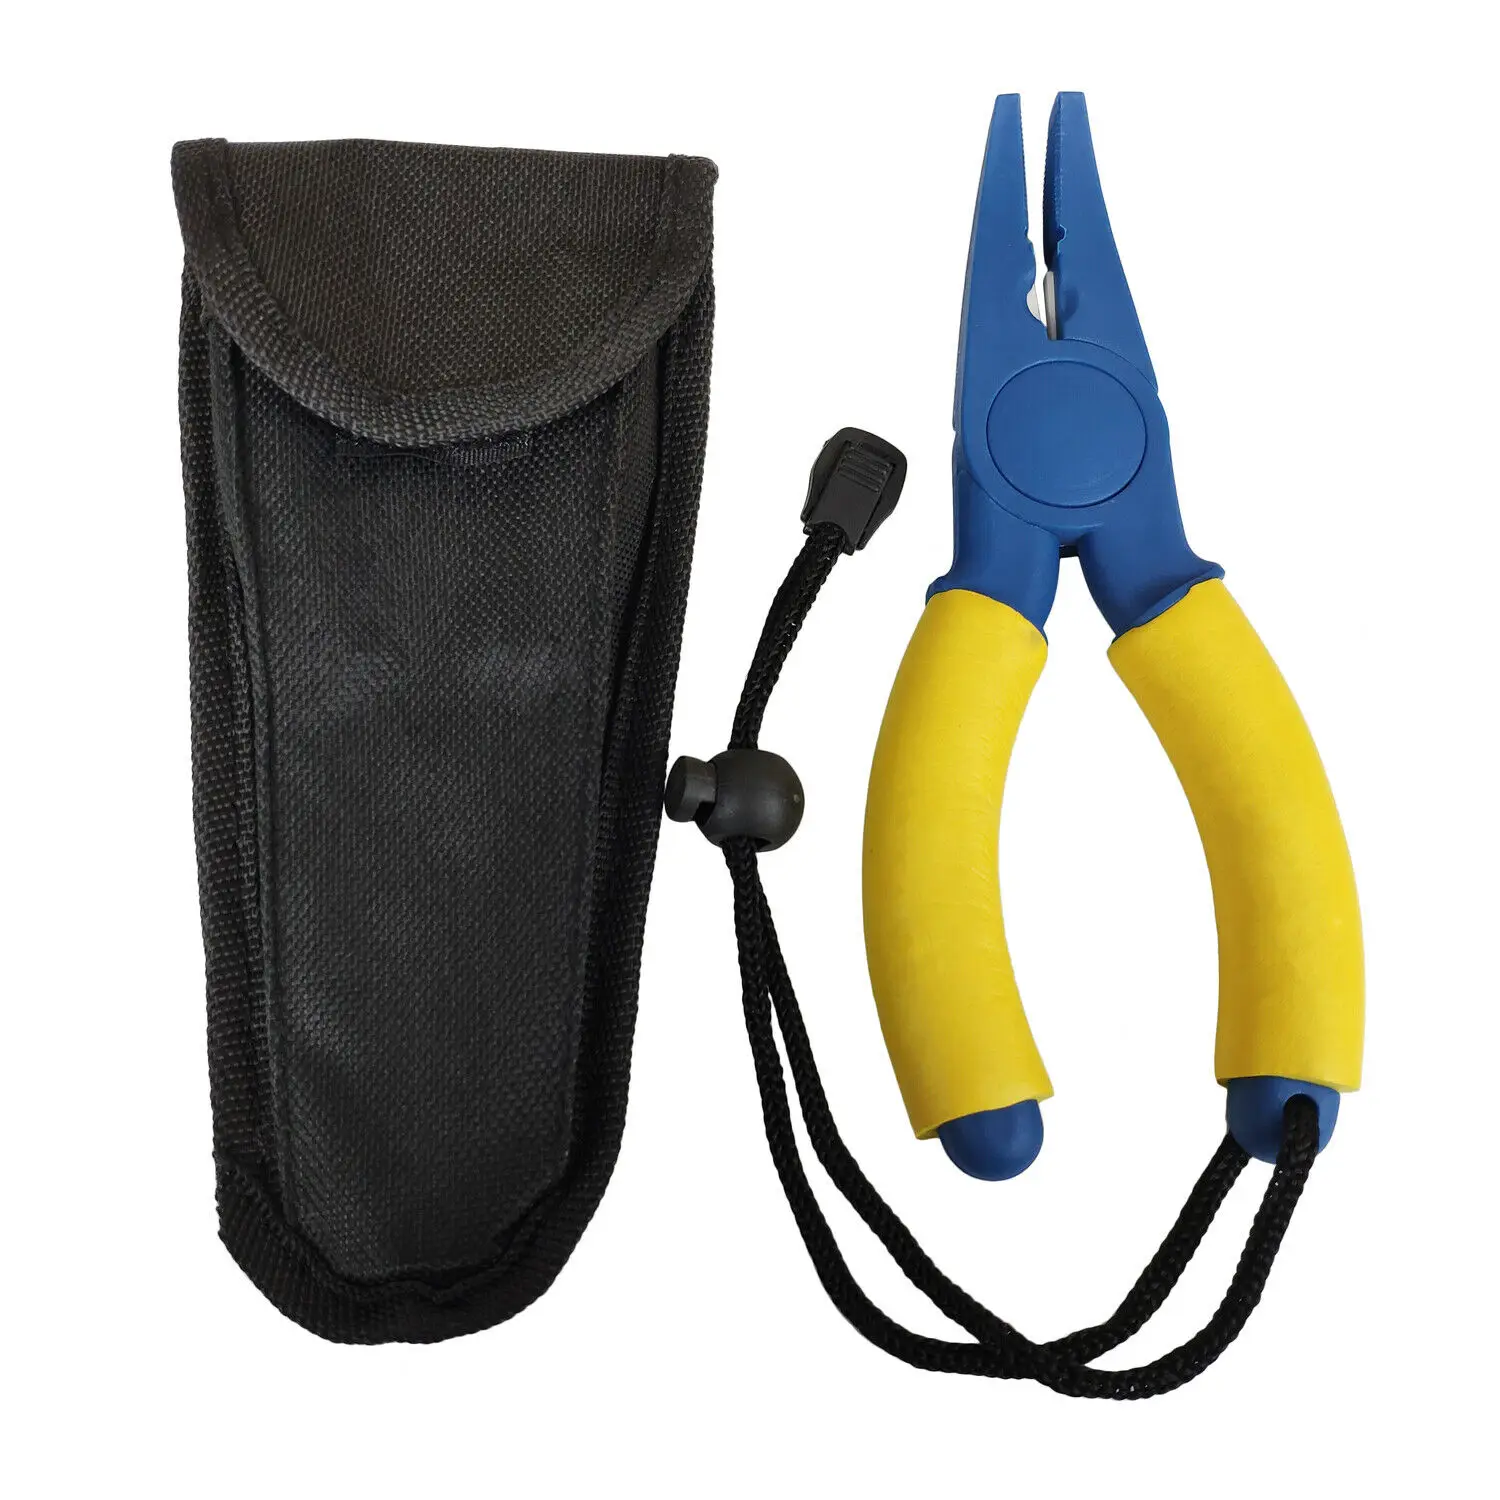 Floating Fishing Pliers Saltwater Boat Fishing Pliers with